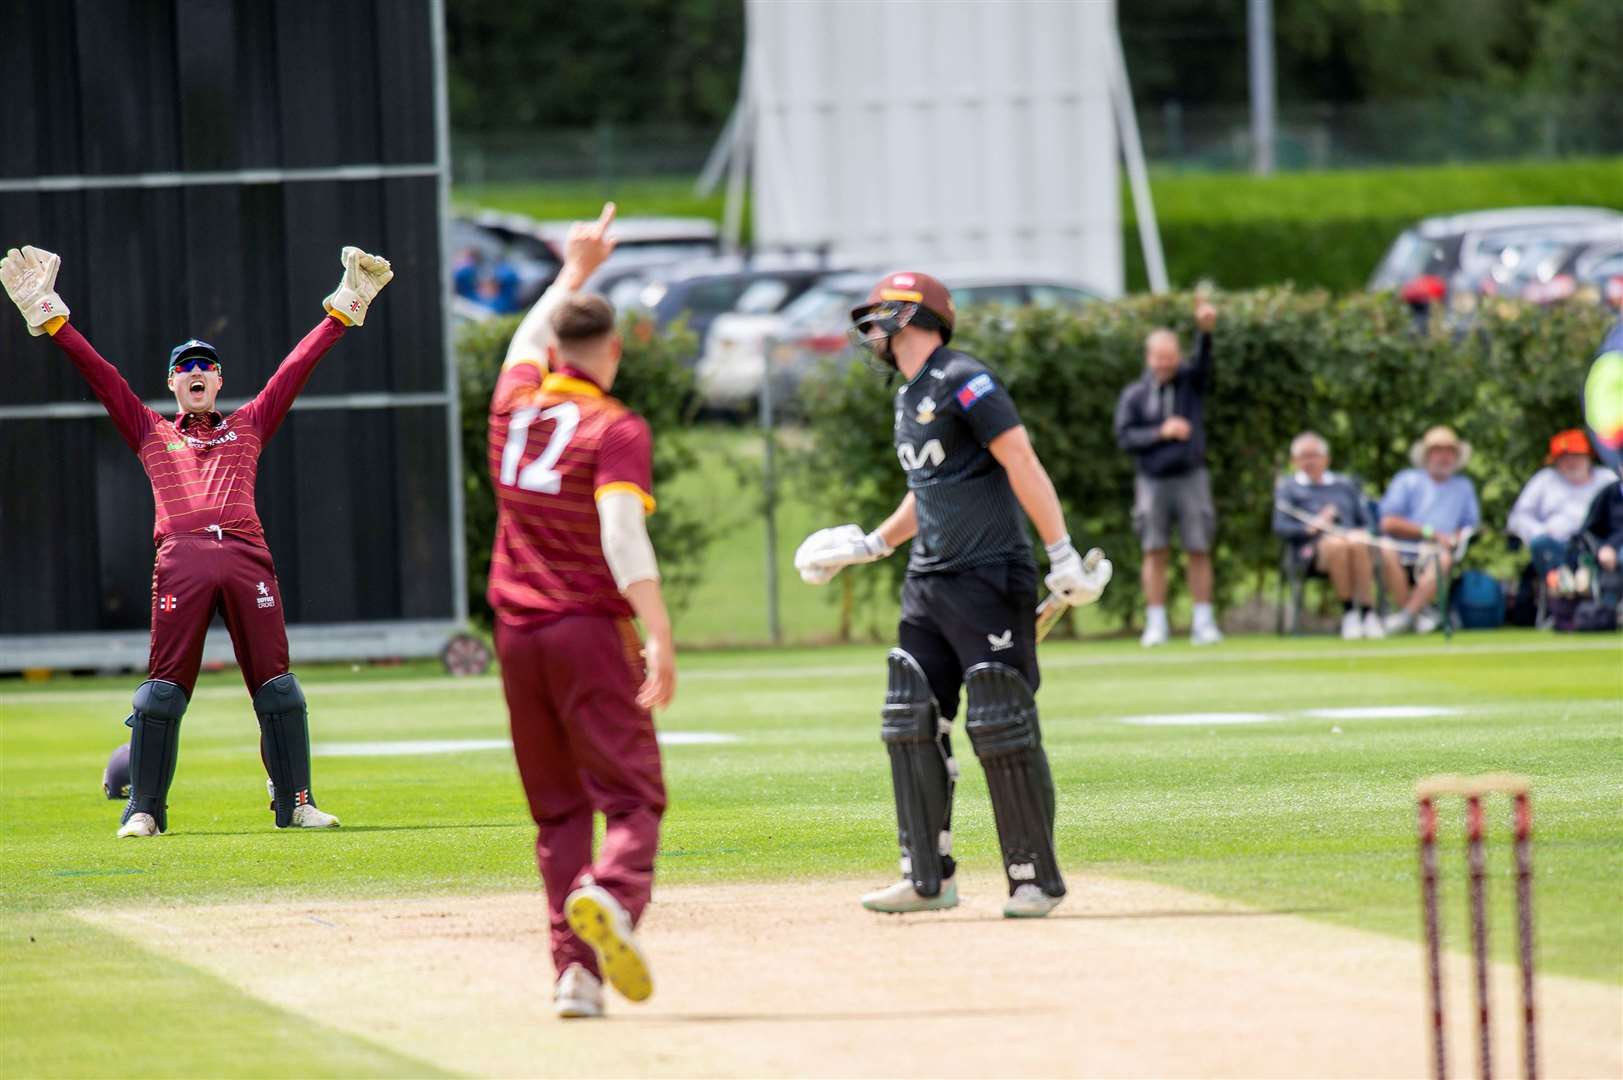 Suffolk wicketkeeper Jacob Marston leads the appeal for a wicket Picture: Mark Westley